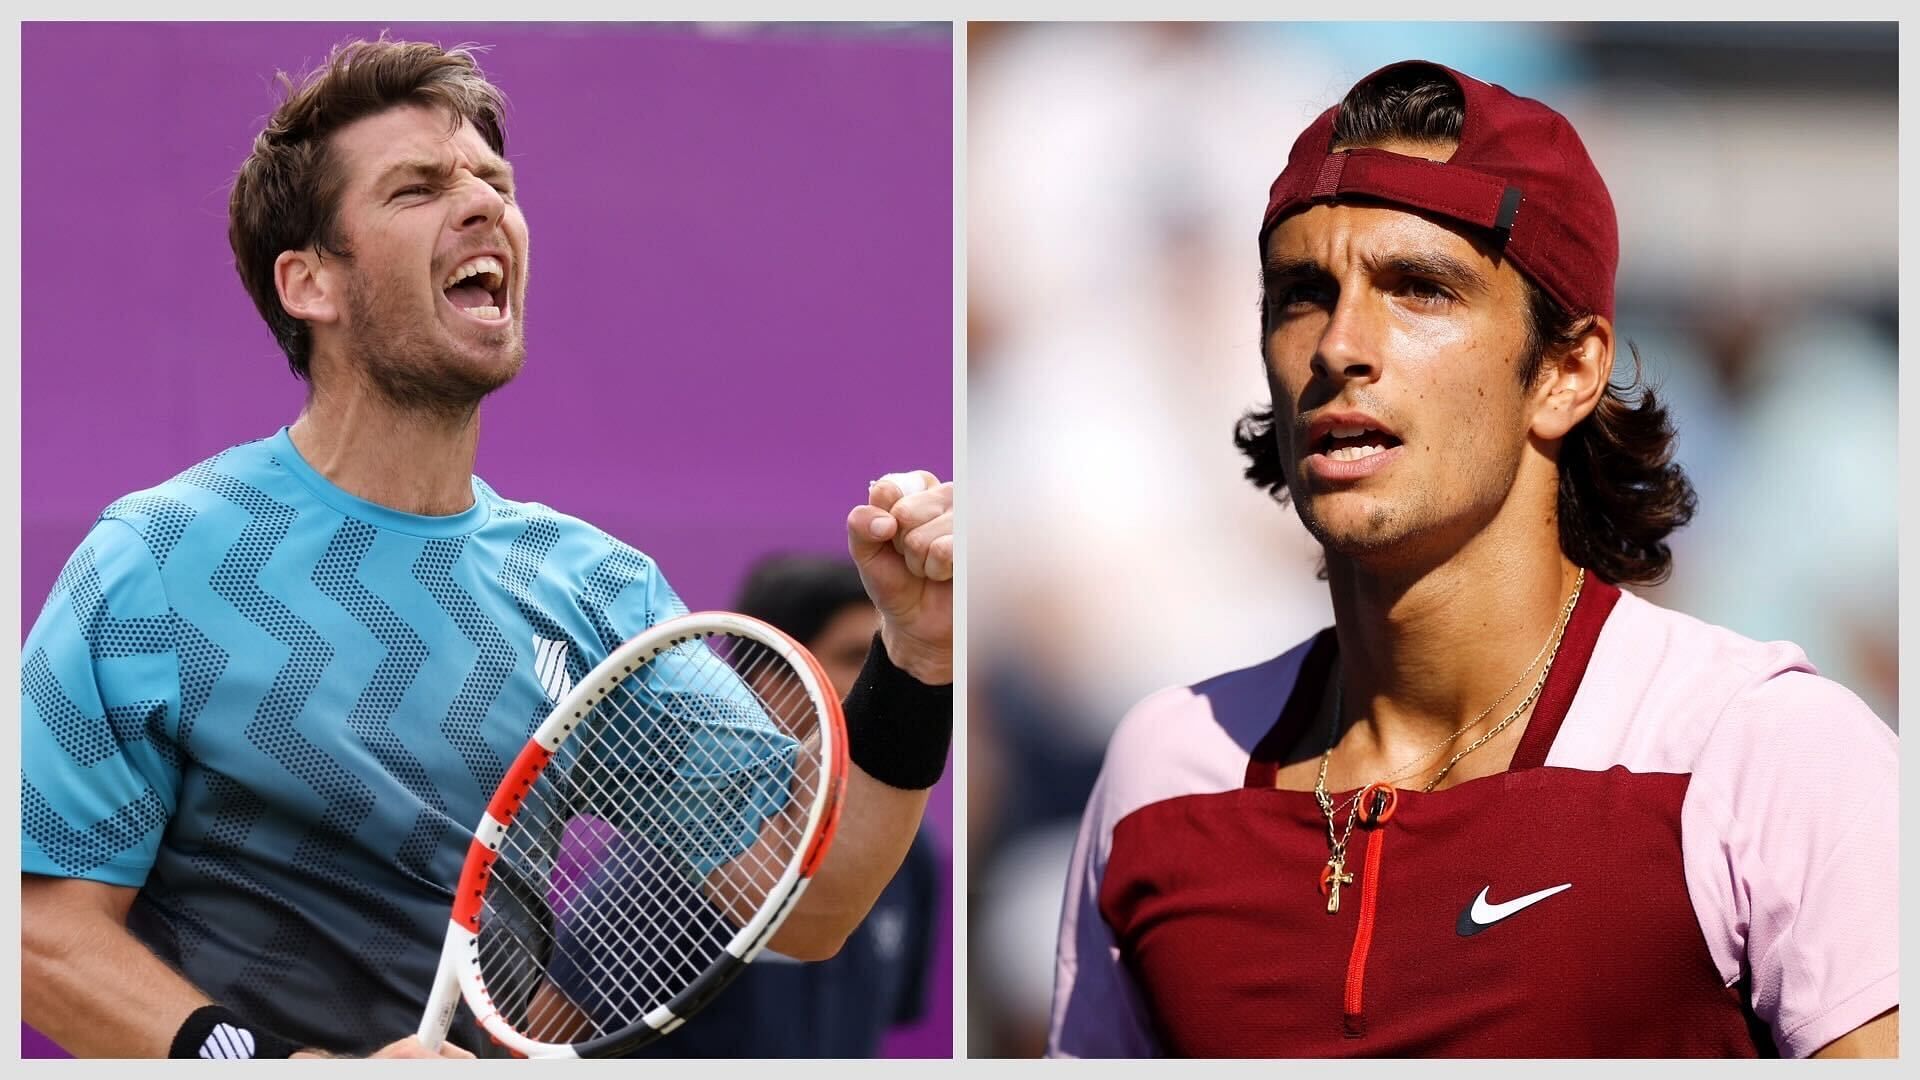 Cameron Norrie vs Lorenzo Musetti is one of the third-round matches at the French Open 2023.